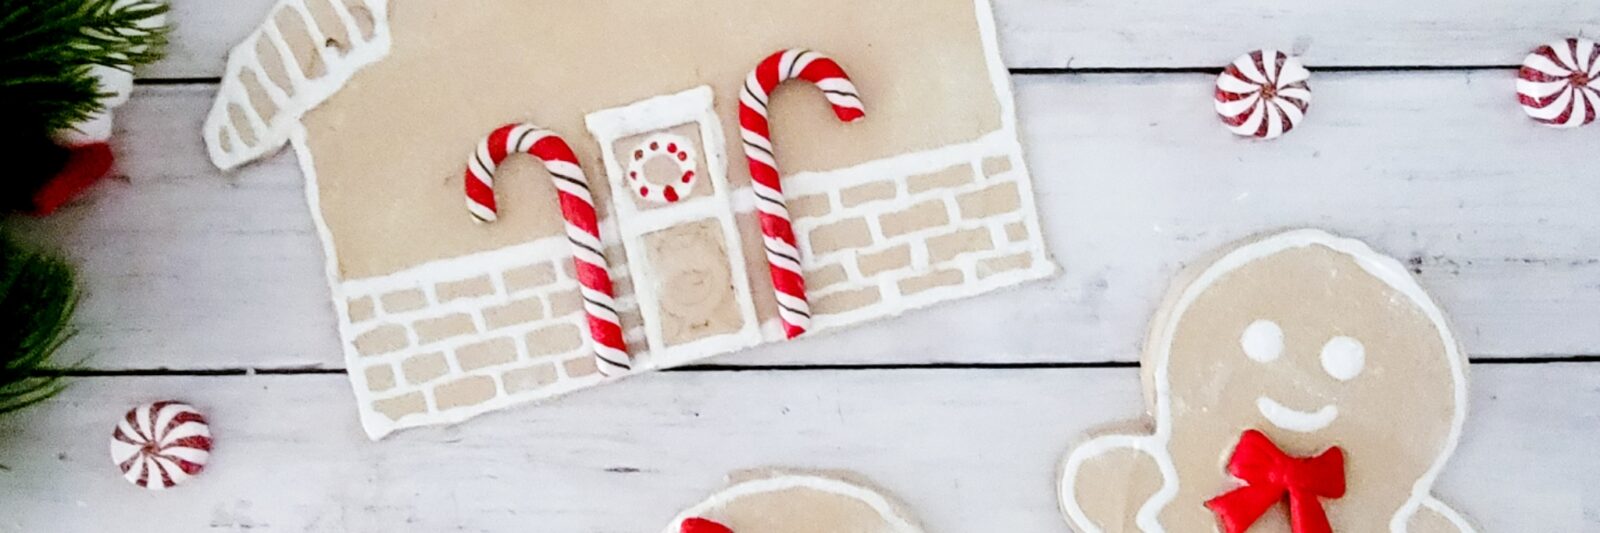 Fake Gingerbread decorations